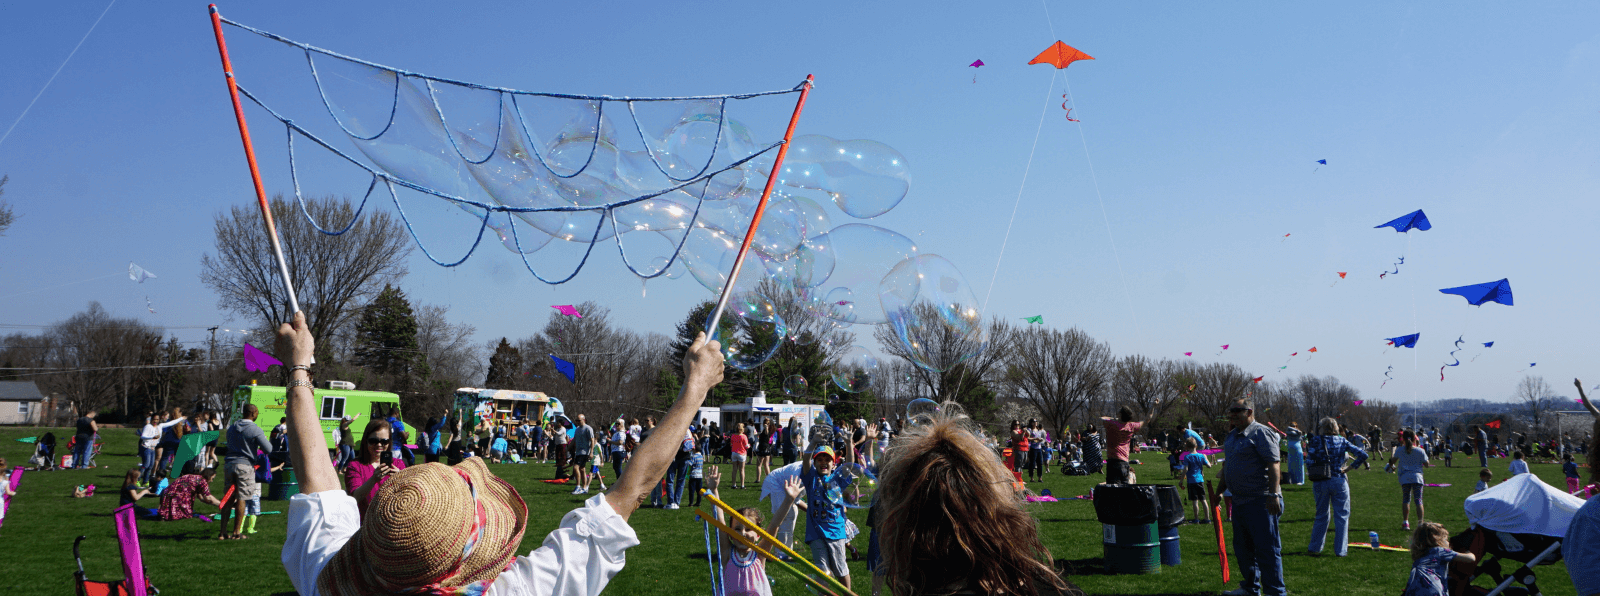 Person wearing a brown hat holds a bubble maker at an outdoor kite festival